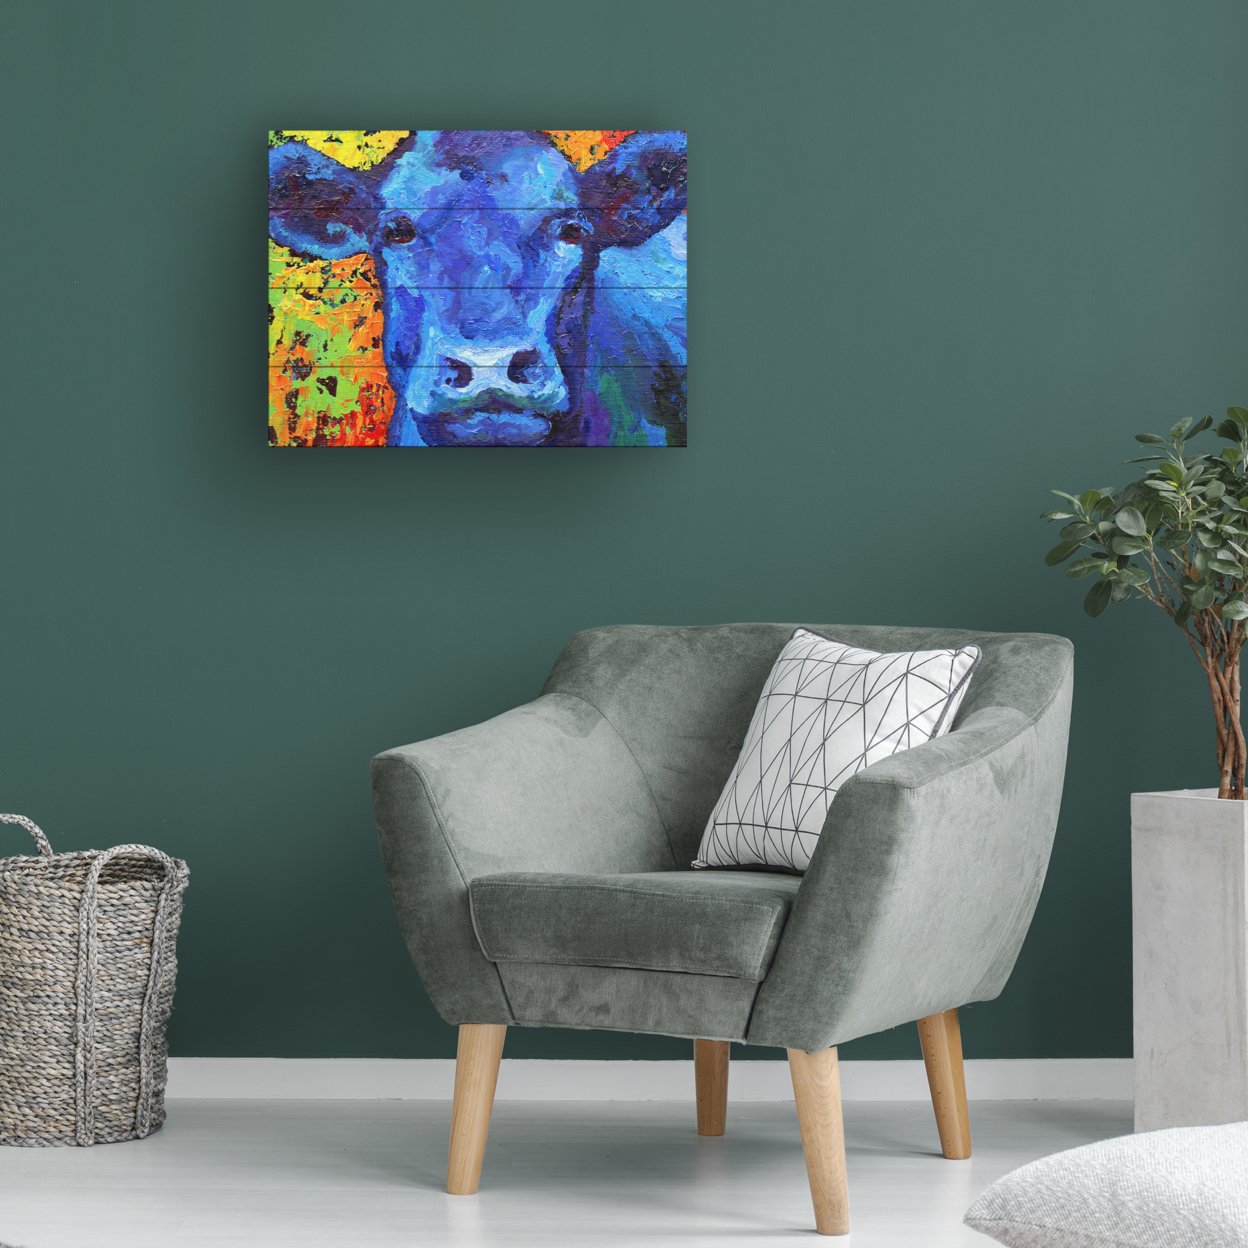 Wall Art 12 X 16 Inches Titled Blue Cow Ready To Hang Printed On Wooden Planks